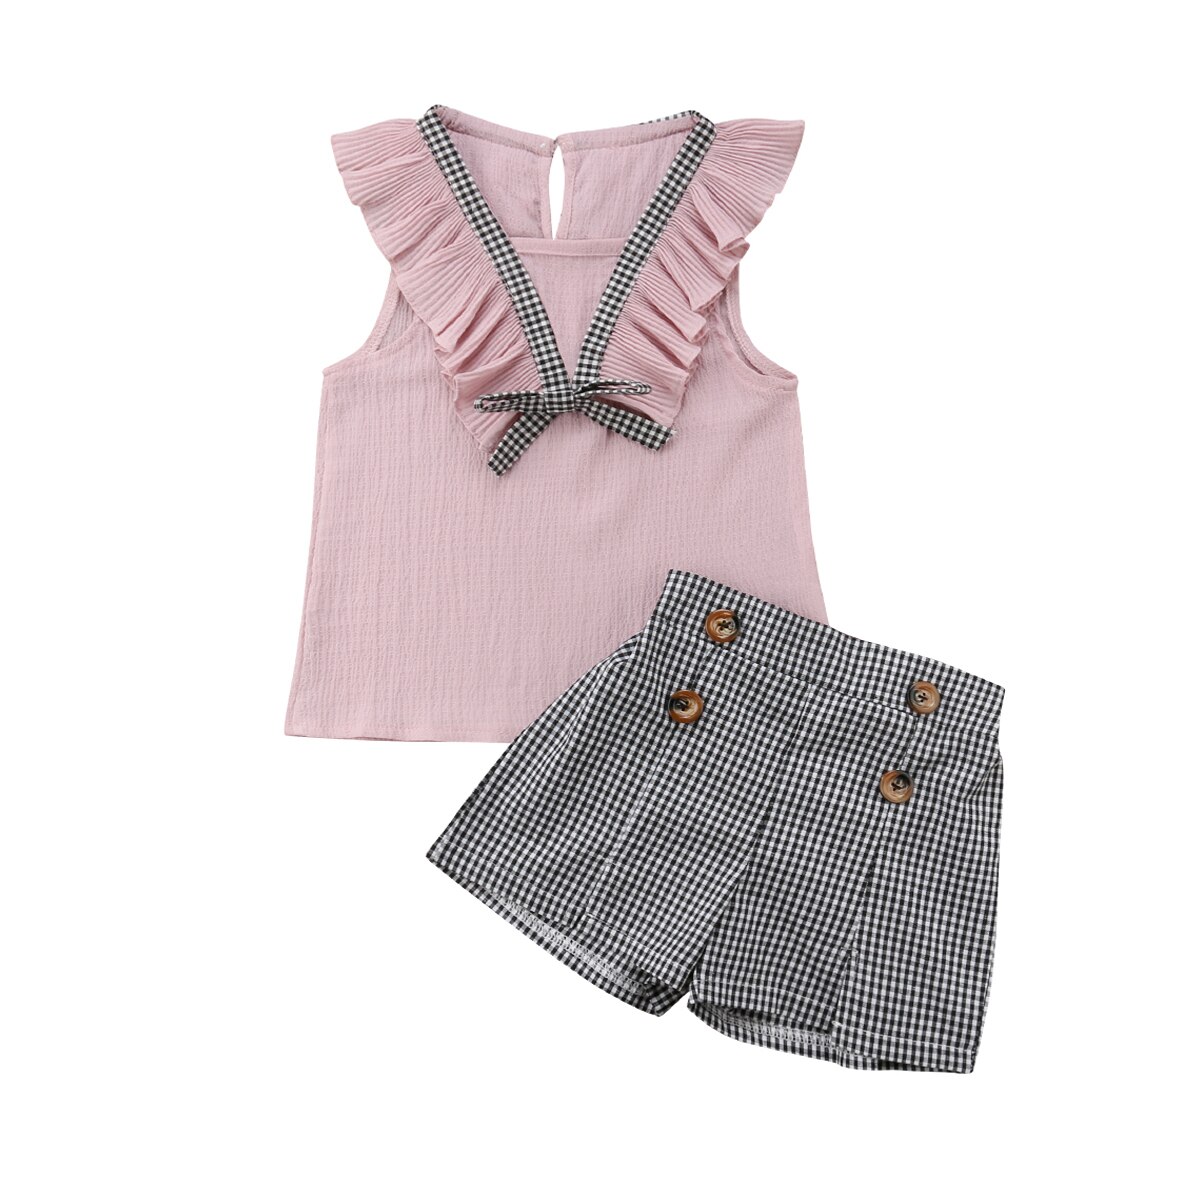 2-9Y-Kids-Girls-Summer-Clothes-Sets-Baby-Ruffle-Sleeveless-Tops-Plaid-Short-Pant-Children-Casual-5